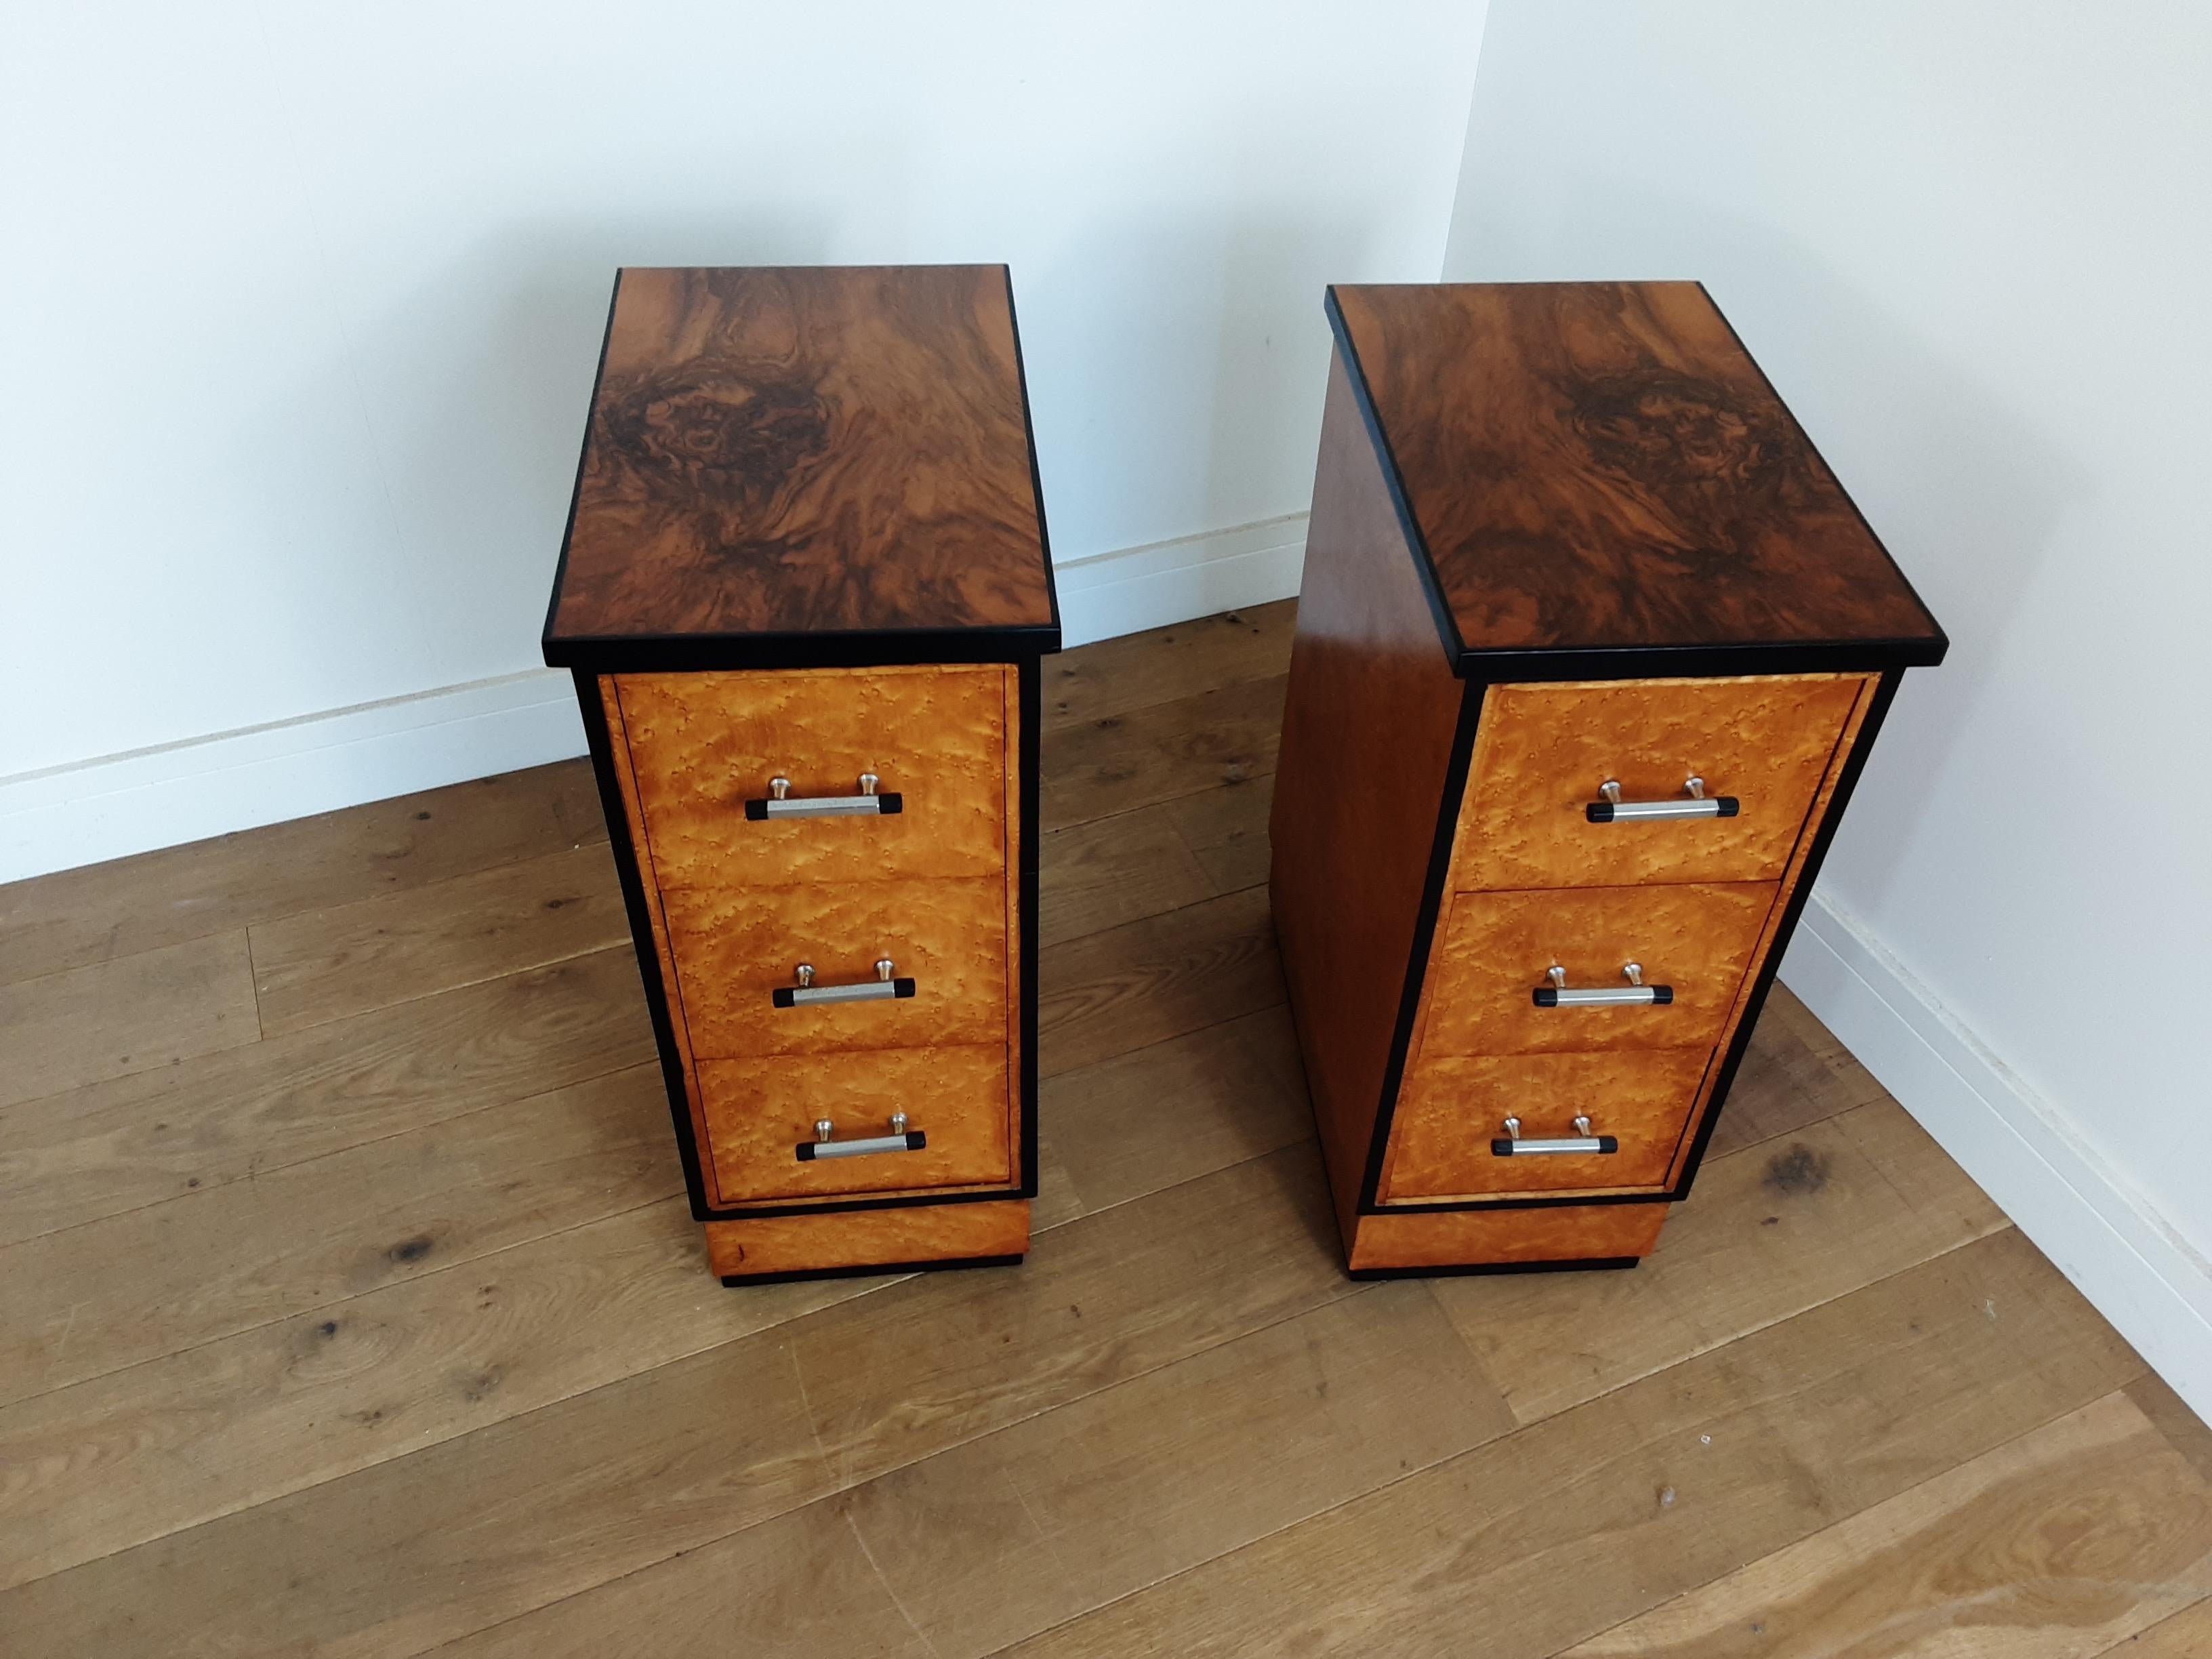 20th Century Pair of British Art Deco Bedside Cabinets by Epstein in Birdseye Maple, 1930s